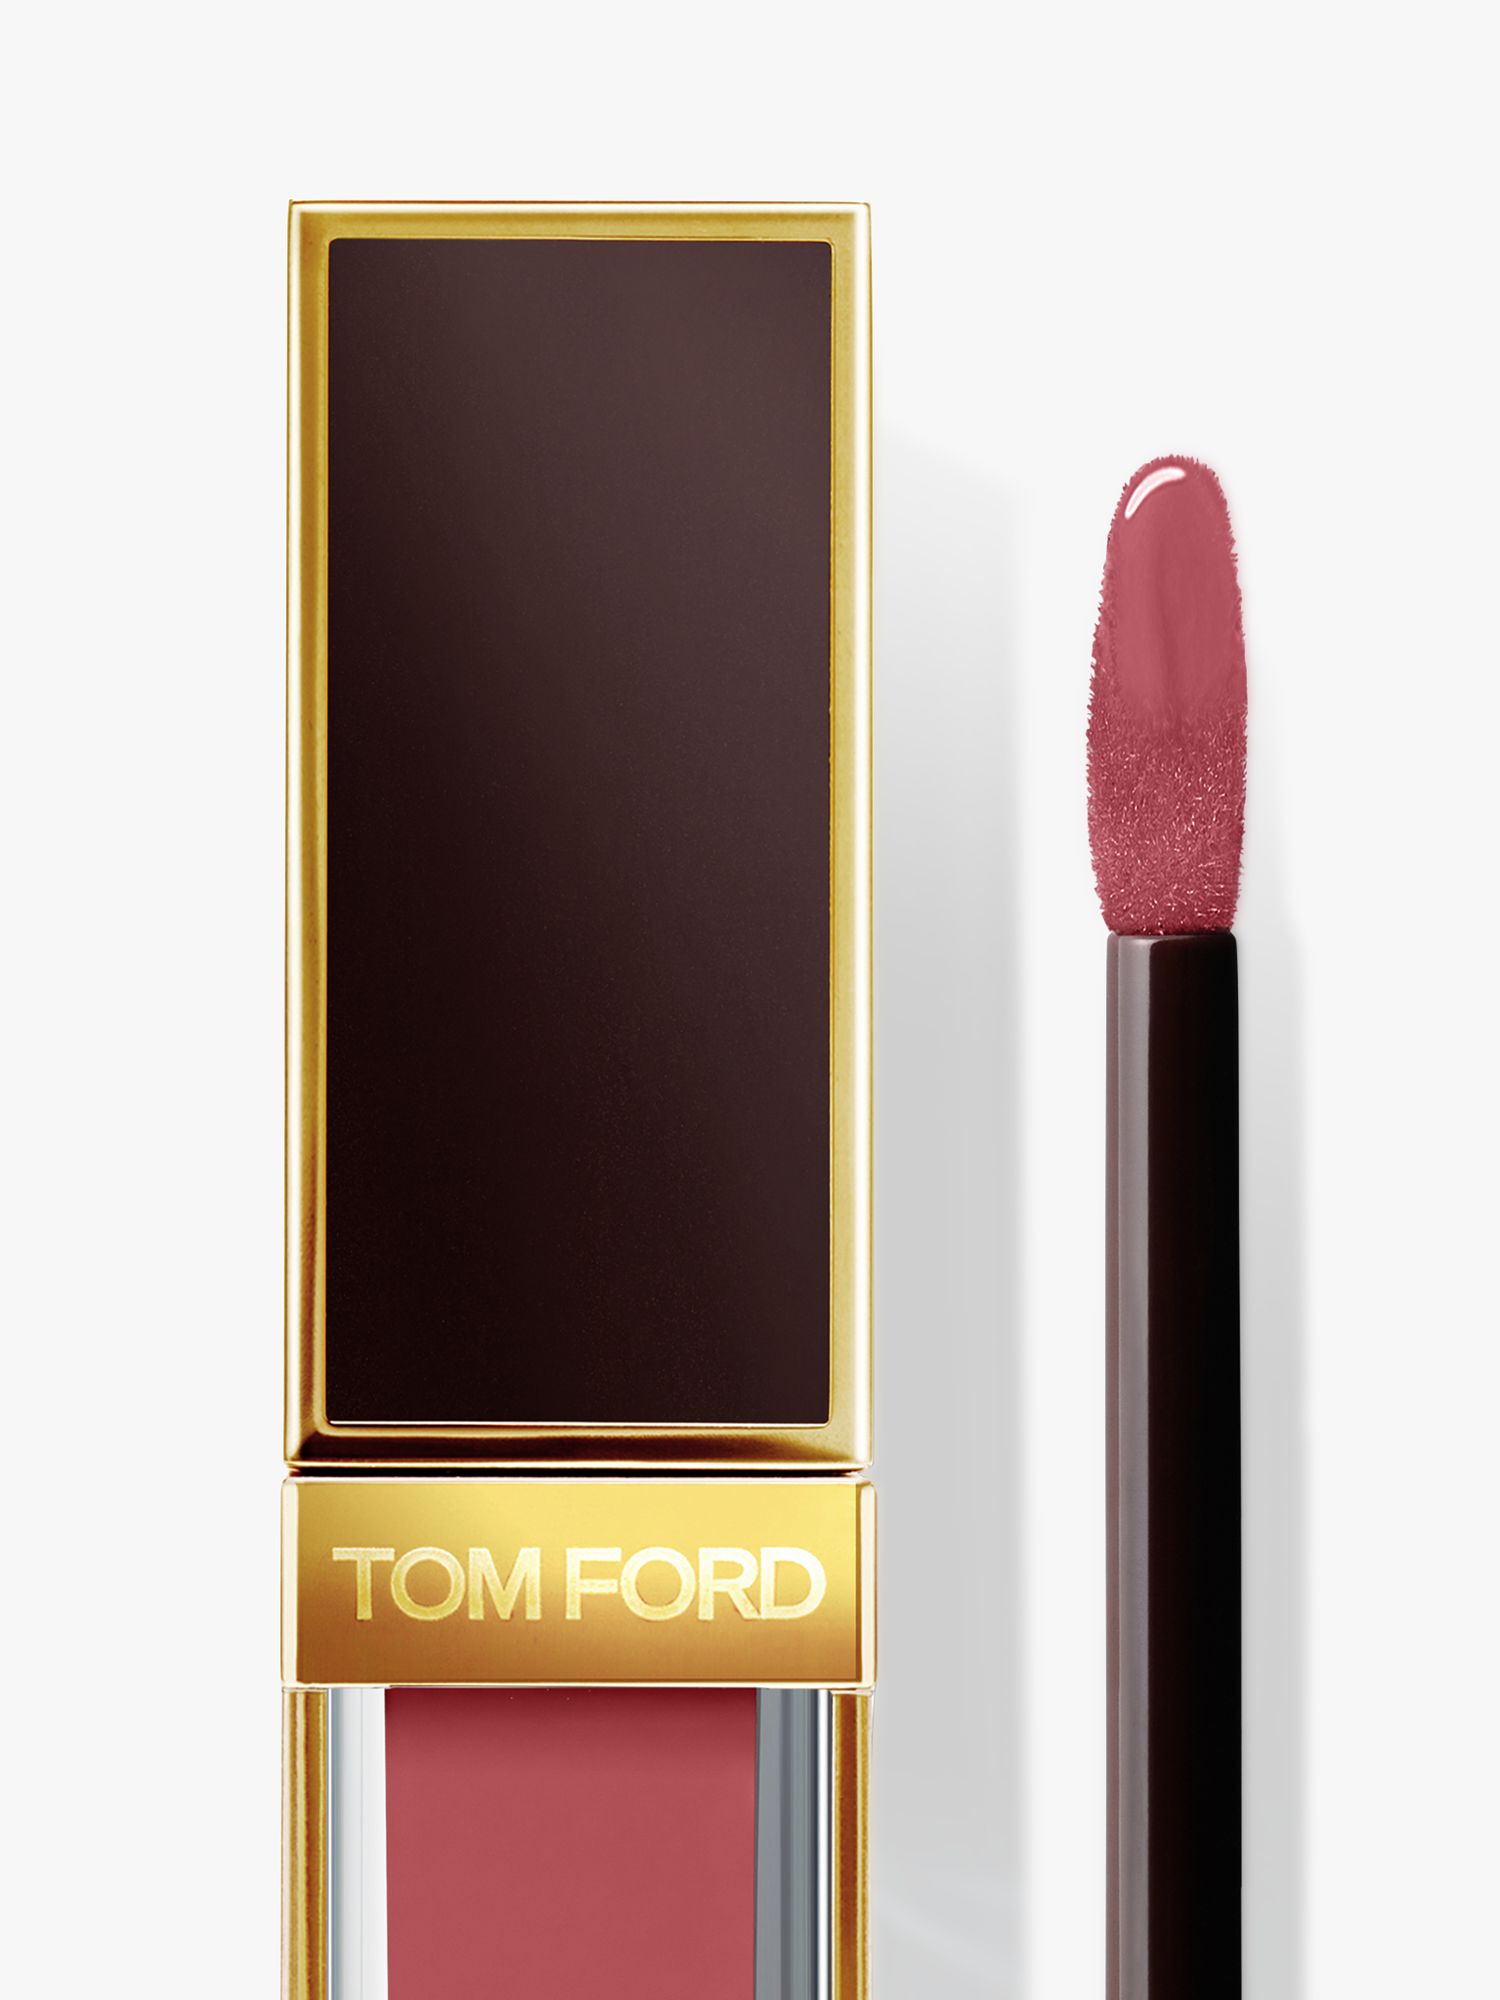 TOM FORD Gloss Luxe, 22 Sunrise Pink 4